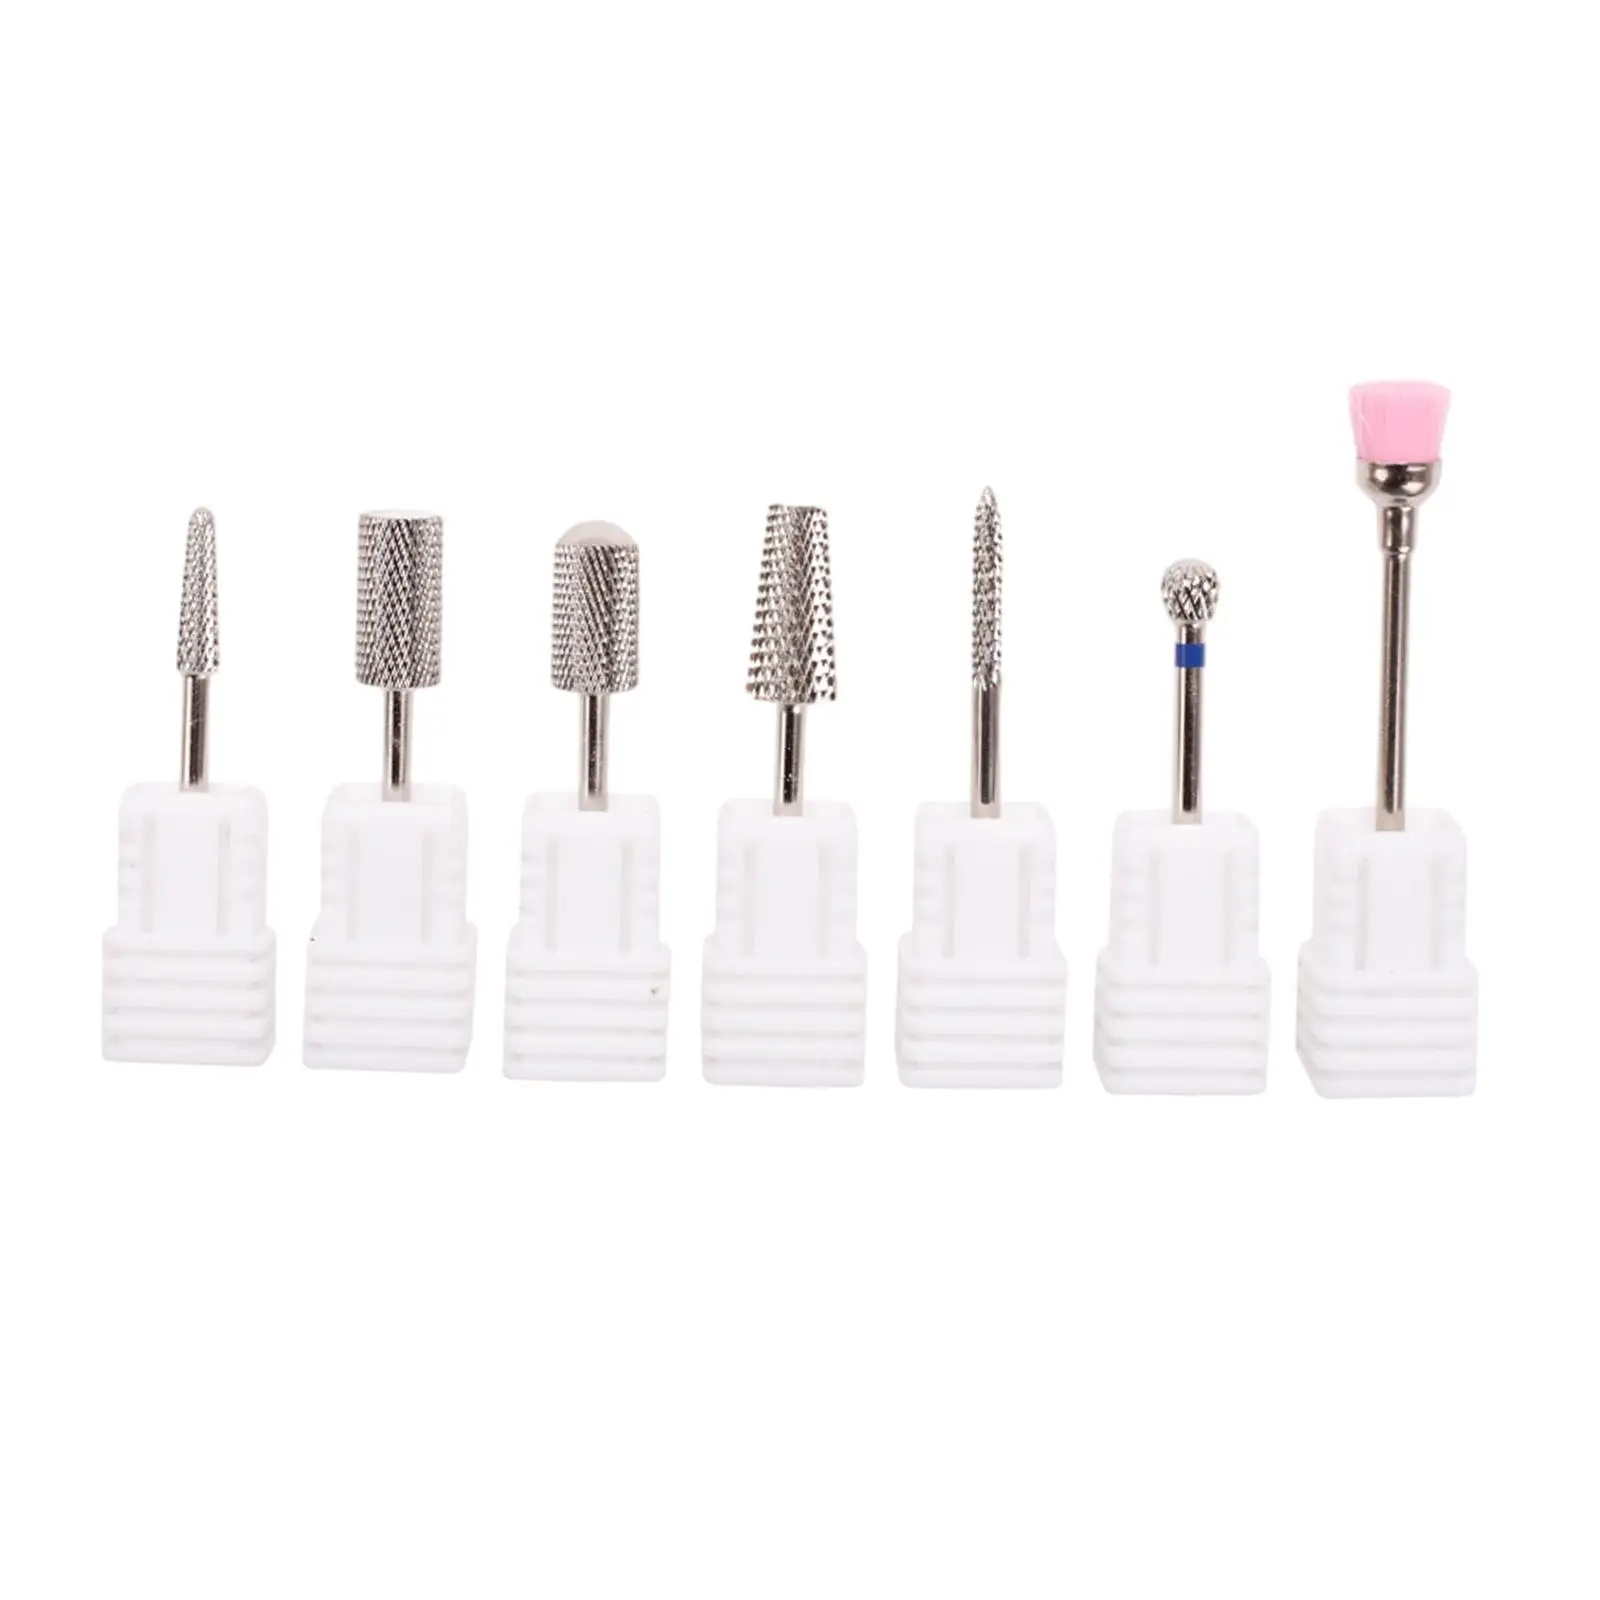 7 Pieces Manicure Bits Electric Manicure Head Replacement Device Cuticle Remove Dust Brush Home Salon Use Nail Polish Bits